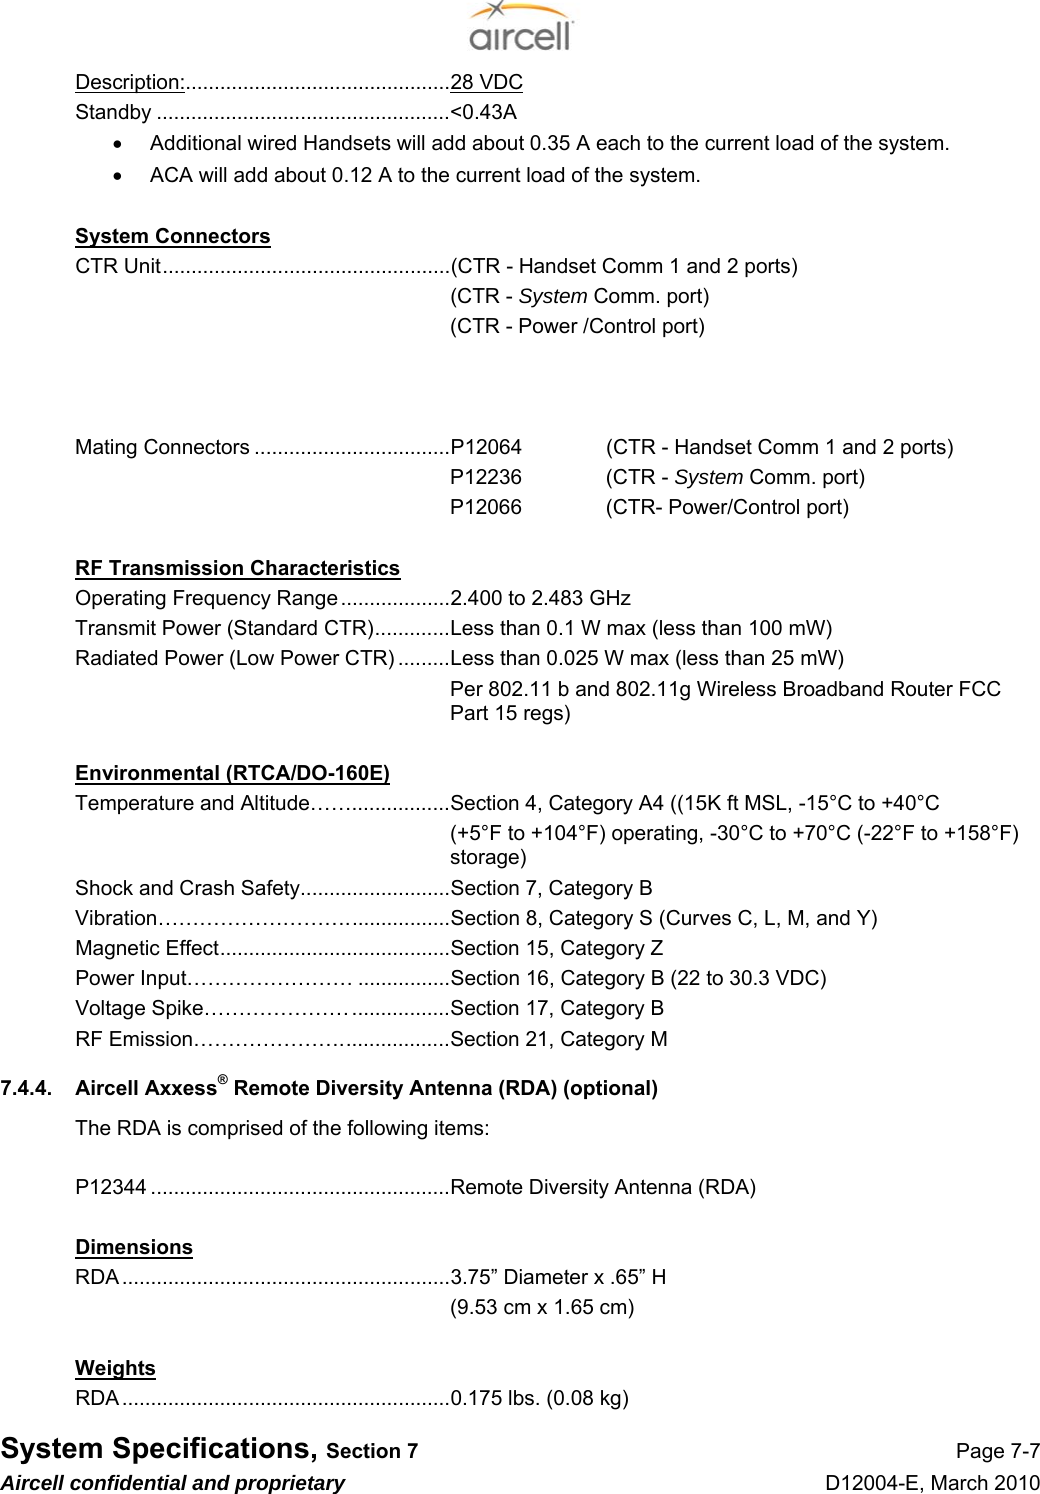  System Specifications, Section 7 Page 7-7 Aircell confidential and proprietary D12004-E, March 2010 Description:..............................................28 VDC  Standby ...................................................&lt;0.43A  •  Additional wired Handsets will add about 0.35 A each to the current load of the system. •  ACA will add about 0.12 A to the current load of the system.  System Connectors CTR Unit..................................................(CTR - Handset Comm 1 and 2 ports) (CTR - System Comm. port) (CTR - Power /Control port)    Mating Connectors ..................................P12064     (CTR - Handset Comm 1 and 2 ports) P12236    (CTR - System Comm. port) P12066    (CTR- Power/Control port)  RF Transmission Characteristics Operating Frequency Range...................2.400 to 2.483 GHz  Transmit Power (Standard CTR).............Less than 0.1 W max (less than 100 mW) Radiated Power (Low Power CTR) .........Less than 0.025 W max (less than 25 mW) Per 802.11 b and 802.11g Wireless Broadband Router FCC Part 15 regs)  Environmental (RTCA/DO-160E) Temperature and Altitude…….................Section 4, Category A4 ((15K ft MSL, -15°C to +40°C (+5°F to +104°F) operating, -30°C to +70°C (-22°F to +158°F) storage) Shock and Crash Safety..........................Section 7, Category B Vibration………………………..................Section 8, Category S (Curves C, L, M, and Y) Magnetic Effect........................................Section 15, Category Z Power Input…………………… ................Section 16, Category B (22 to 30.3 VDC) Voltage Spike………………….................Section 17, Category B RF Emission…………………...................Section 21, Category M 7.4.4.  Aircell Axxess® Remote Diversity Antenna (RDA) (optional)   The RDA is comprised of the following items:   P12344 ....................................................Remote Diversity Antenna (RDA)  Dimensions RDA .........................................................3.75” Diameter x .65” H   (9.53 cm x 1.65 cm)  Weights RDA .........................................................0.175 lbs. (0.08 kg) 